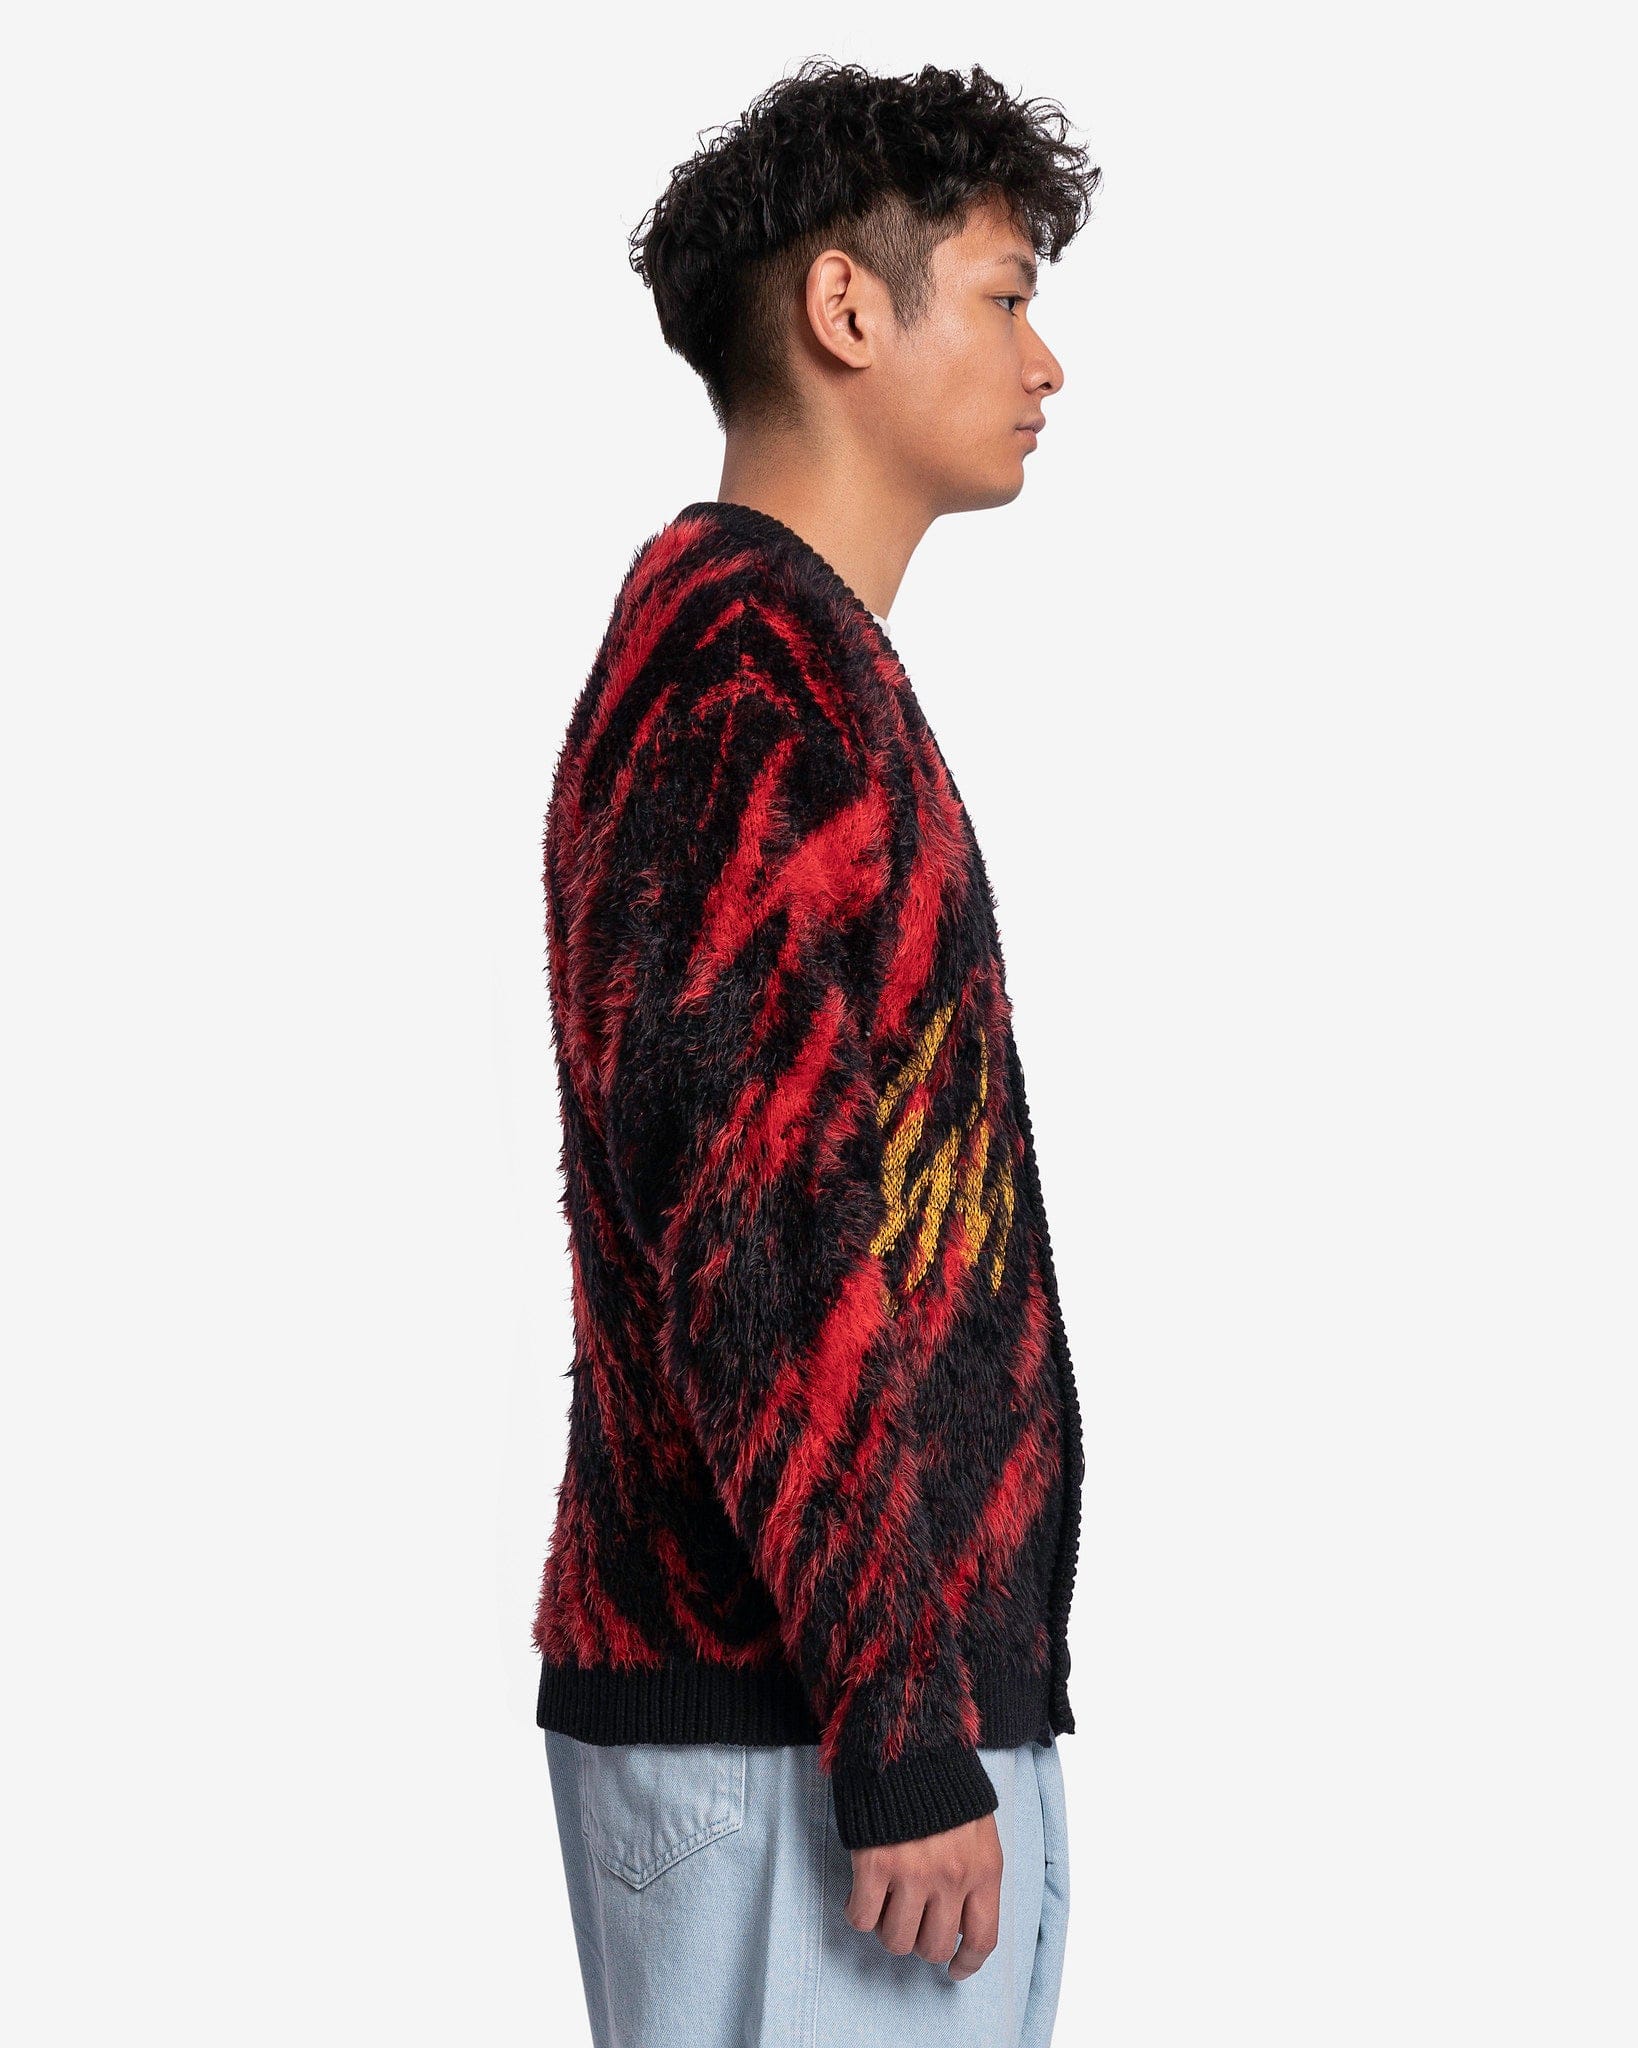 Knit Oversized Mohair Jacquard Cardigan in Black/Red – SVRN